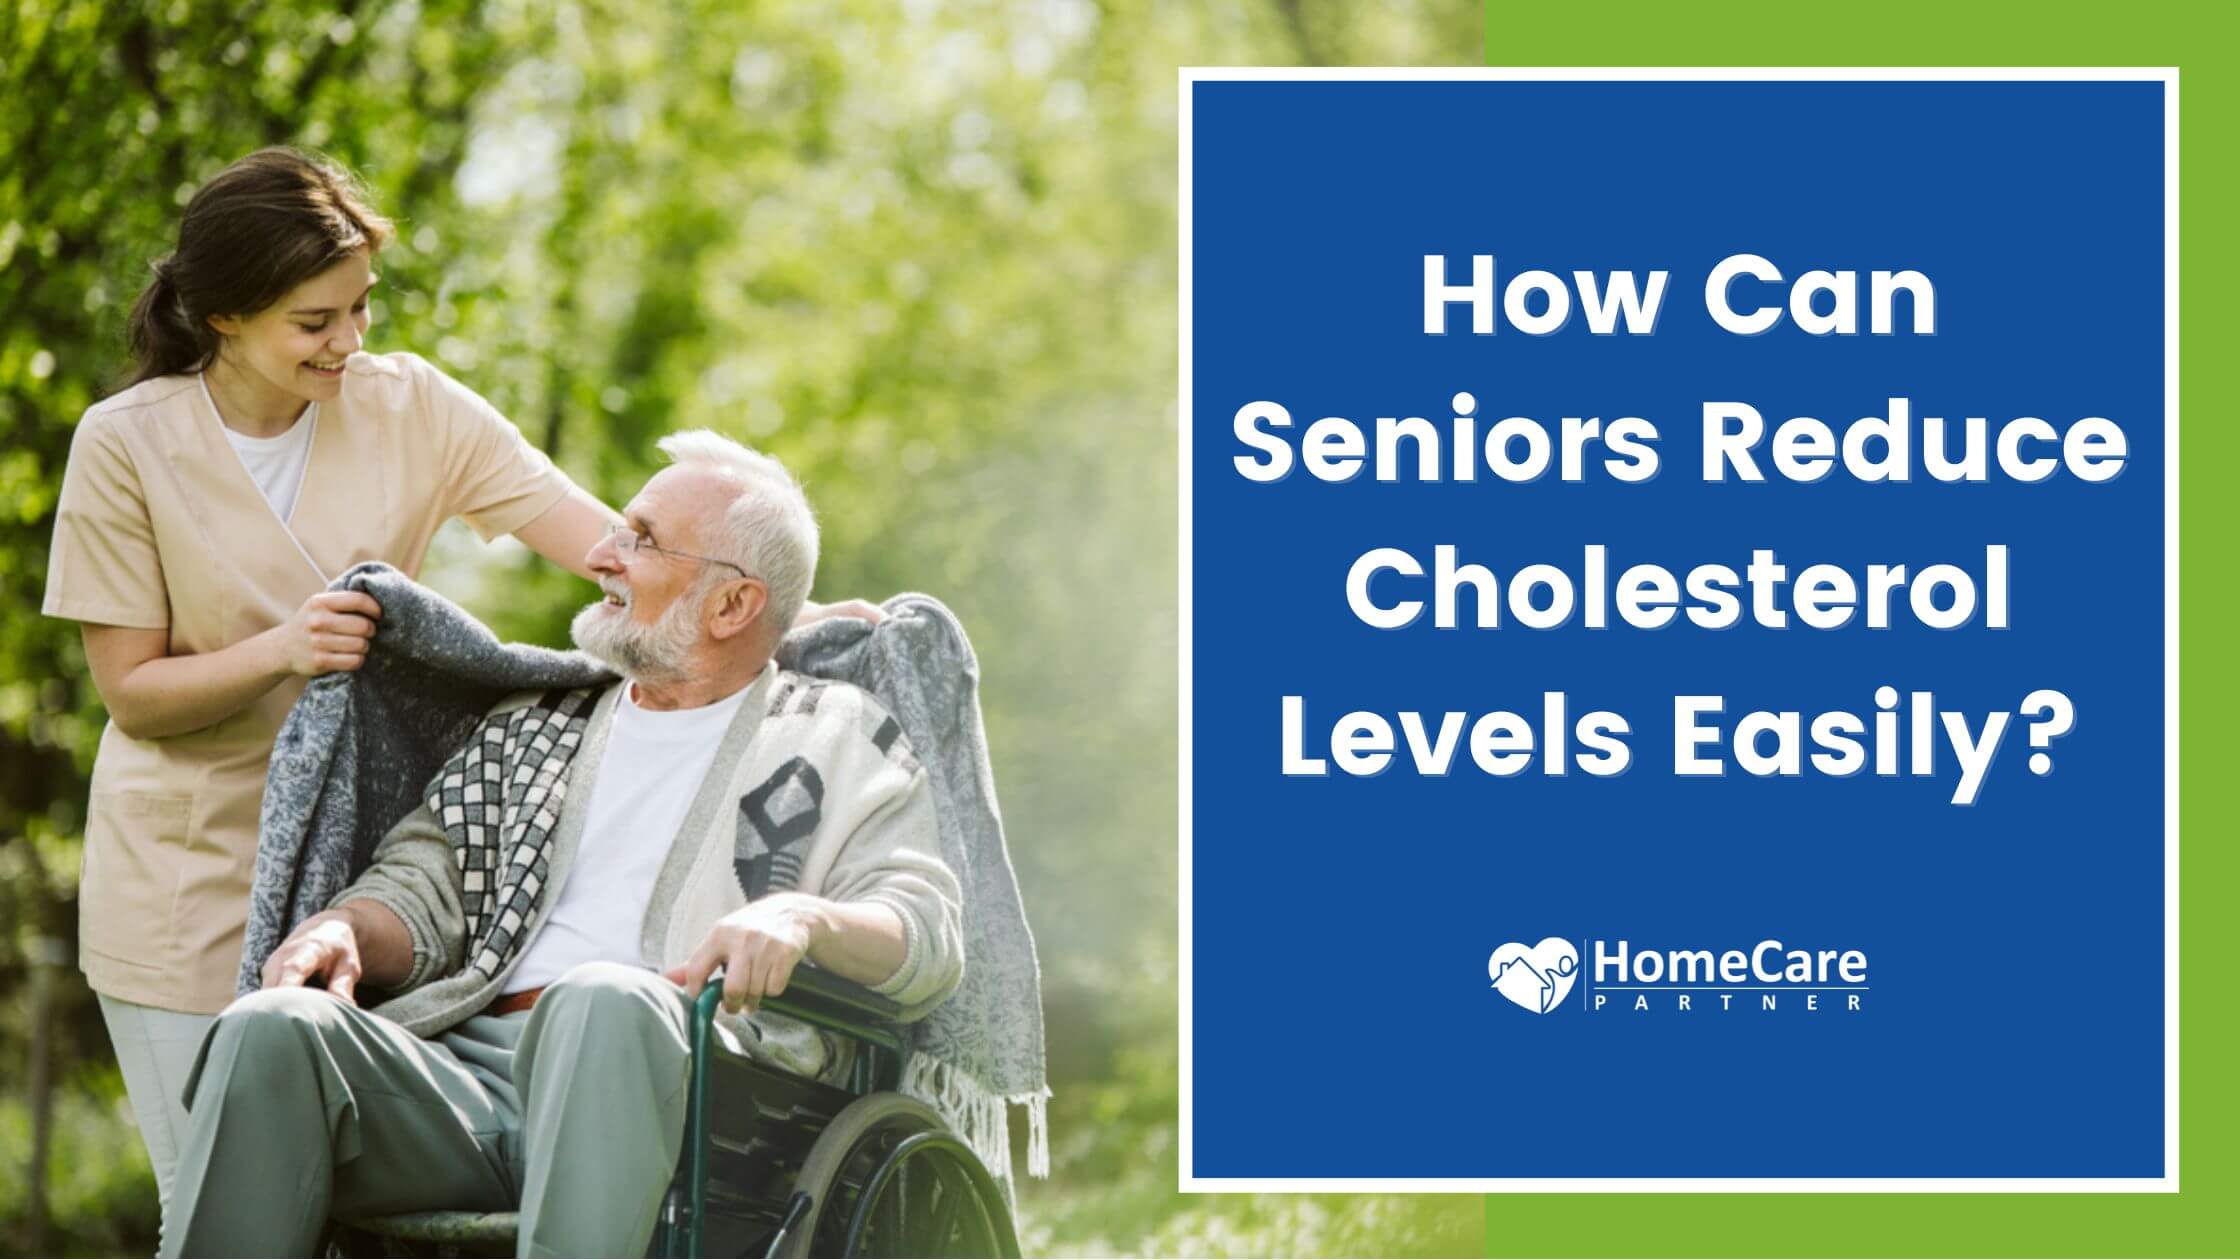 How Can Seniors Reduce Cholesterol Levels Easily?